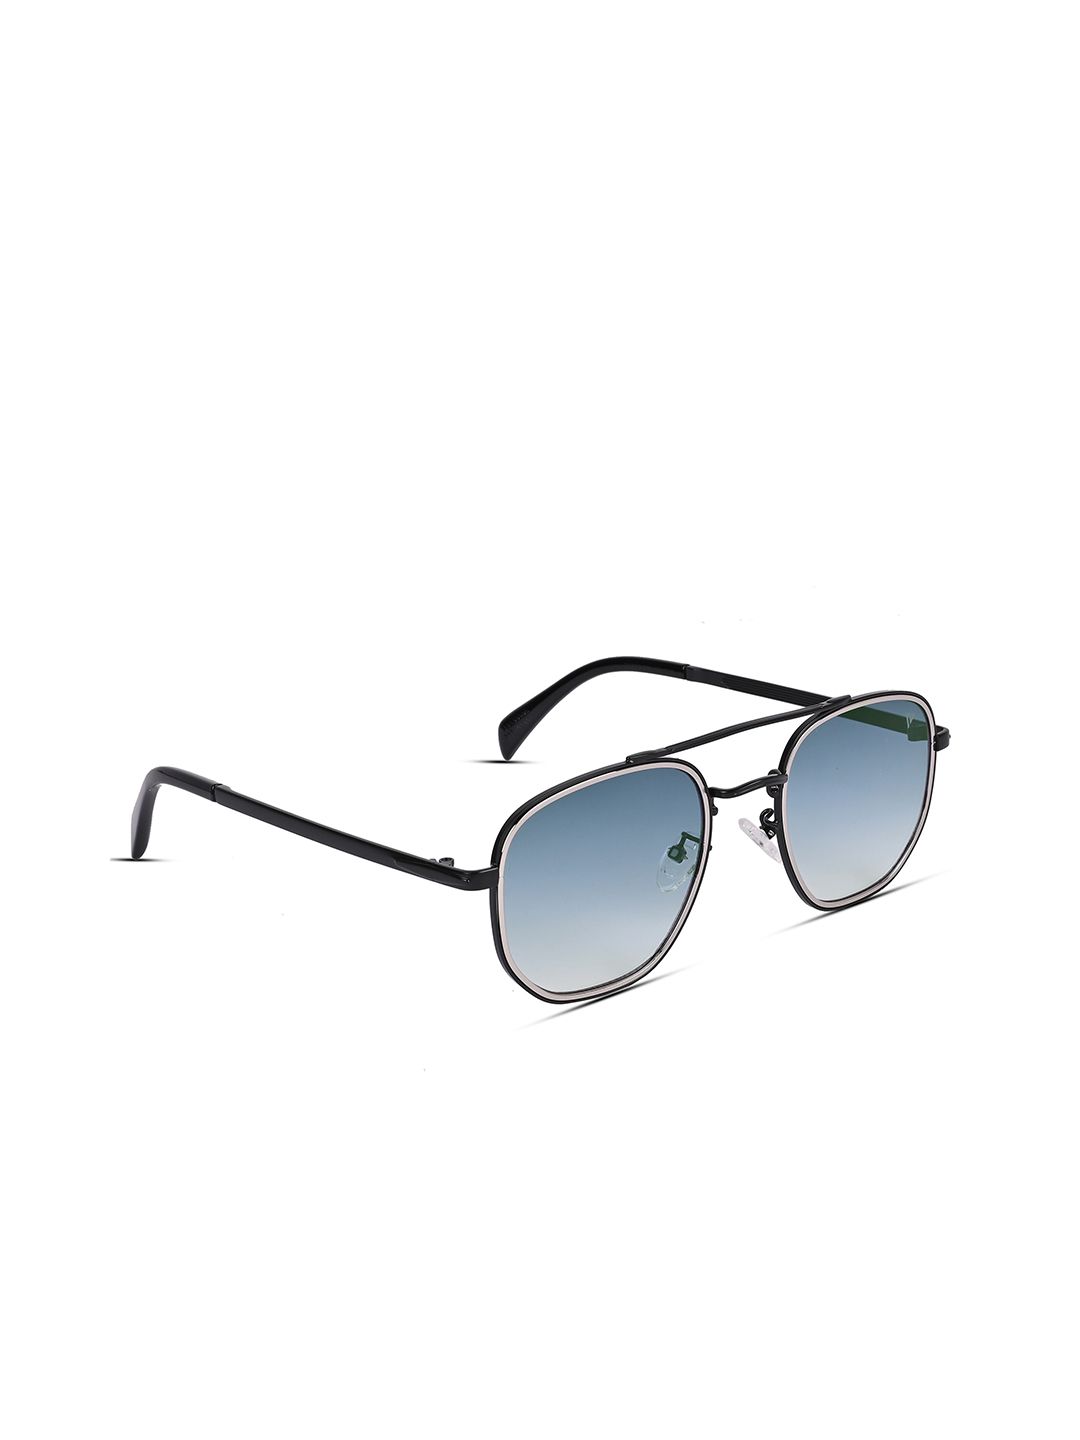 Voyage Unisex Blue Lens & Black Round Sunglasses with UV Protected Lens Price in India